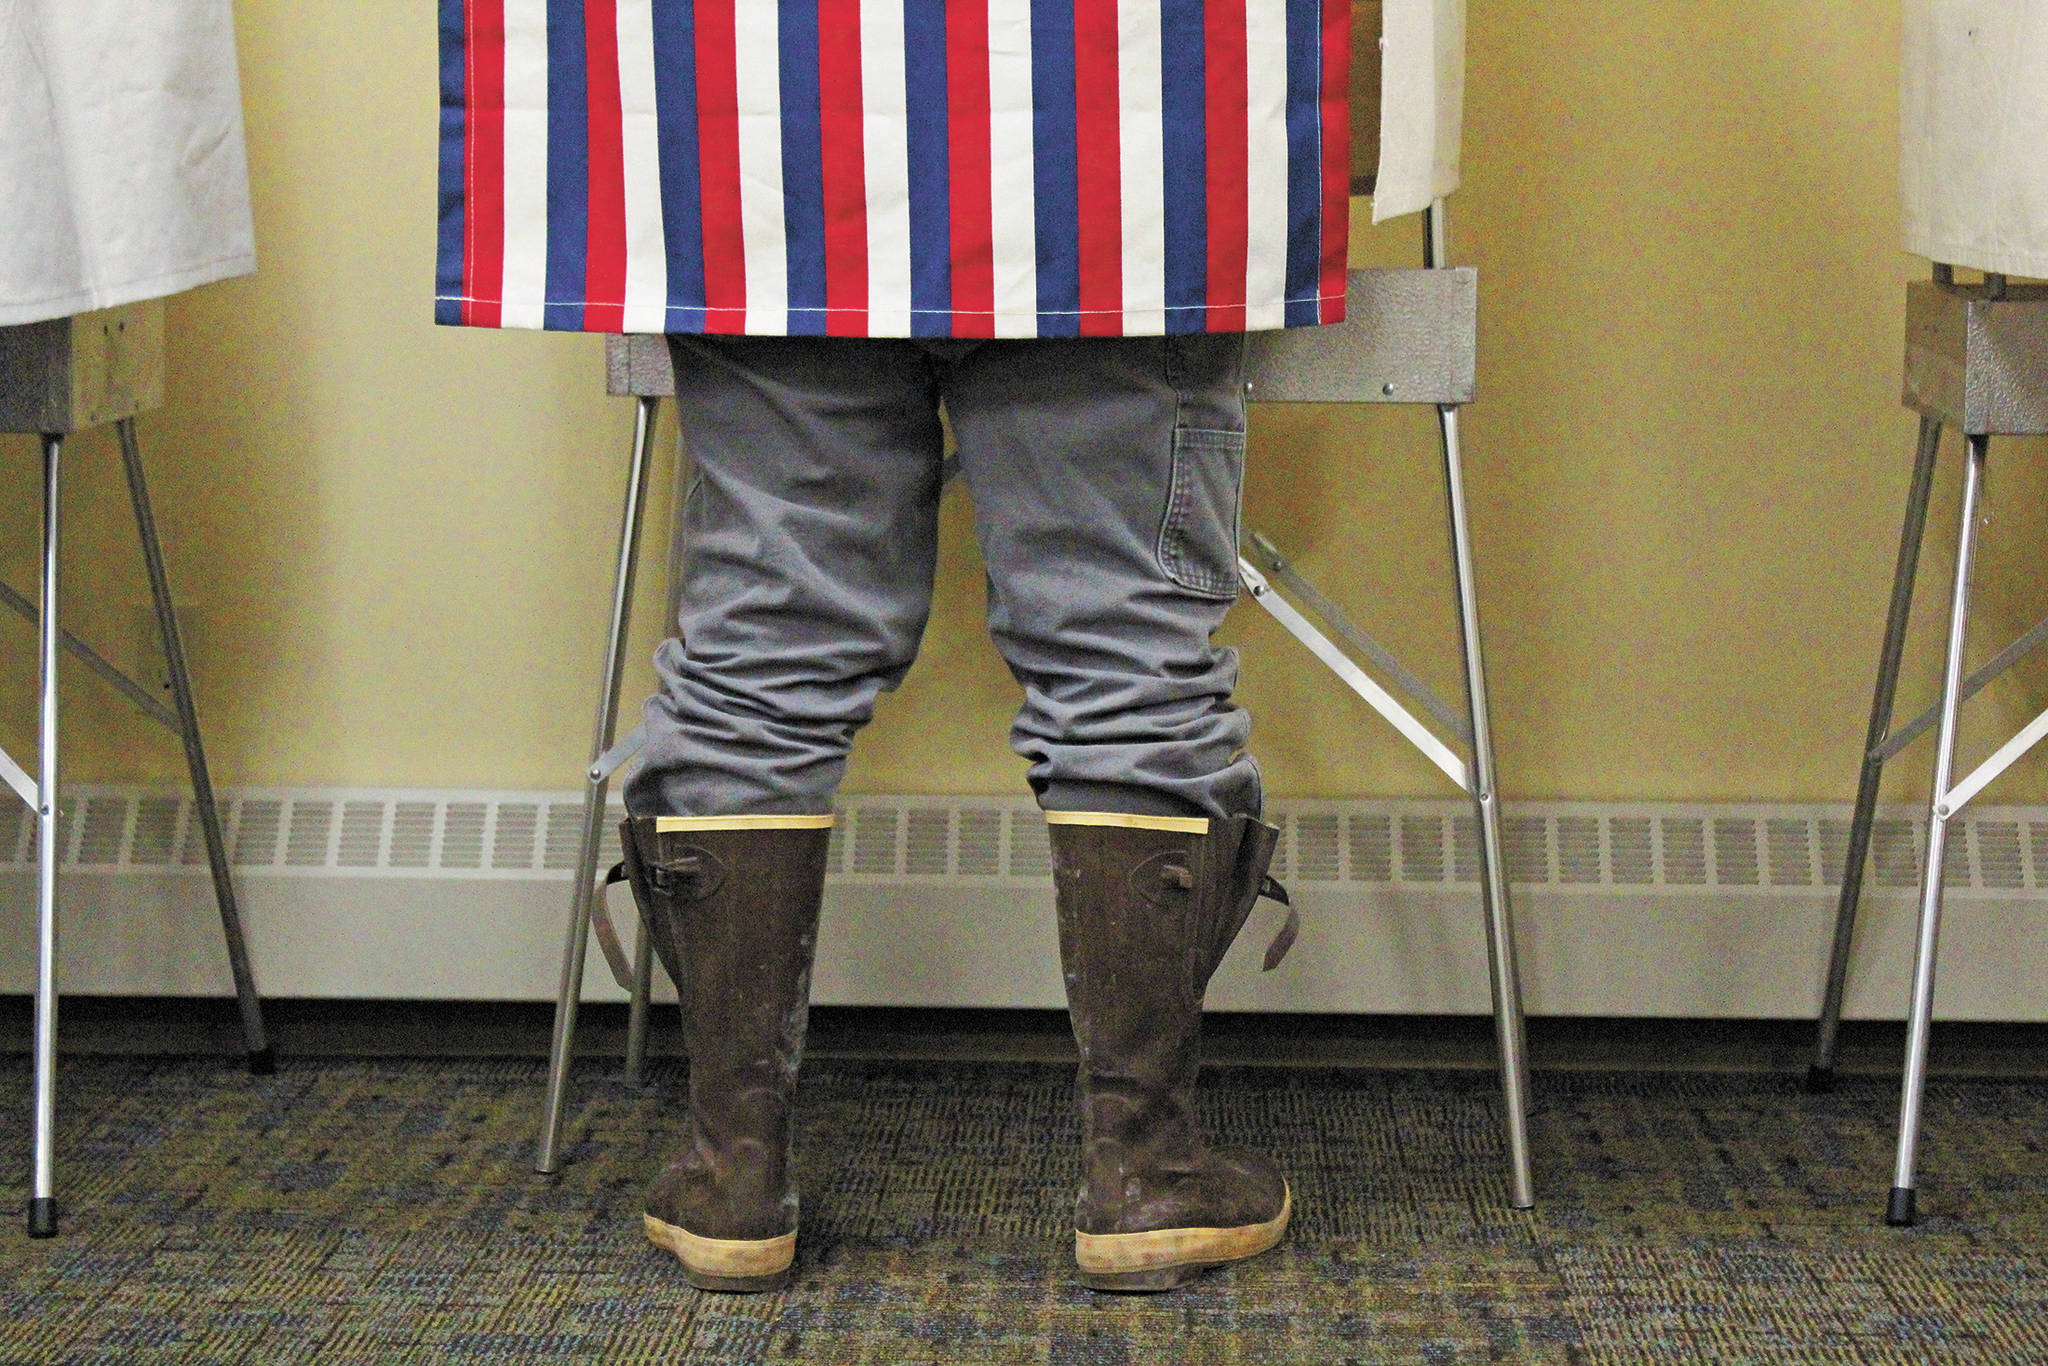 A Homer resident casts their vote during the Primary Election on Tuesday, Aug. 18, 2020 at Homer City Hall in Homer, Alaska. (Photo by Megan Pacer/Homer News)